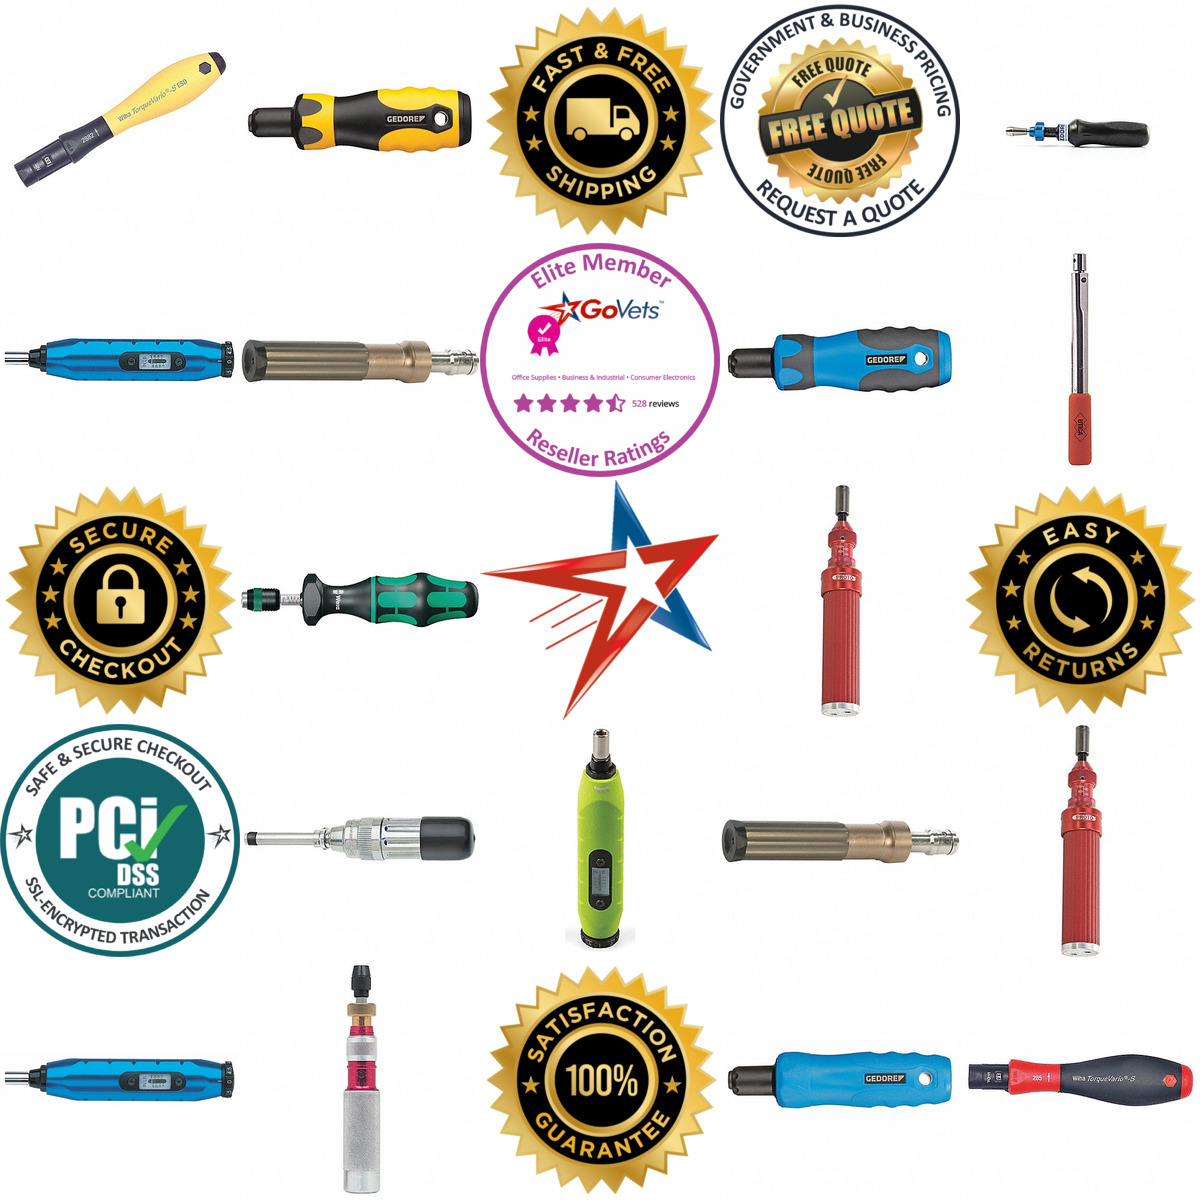 A selection of Adjustable Torque Screwdrivers products on GoVets